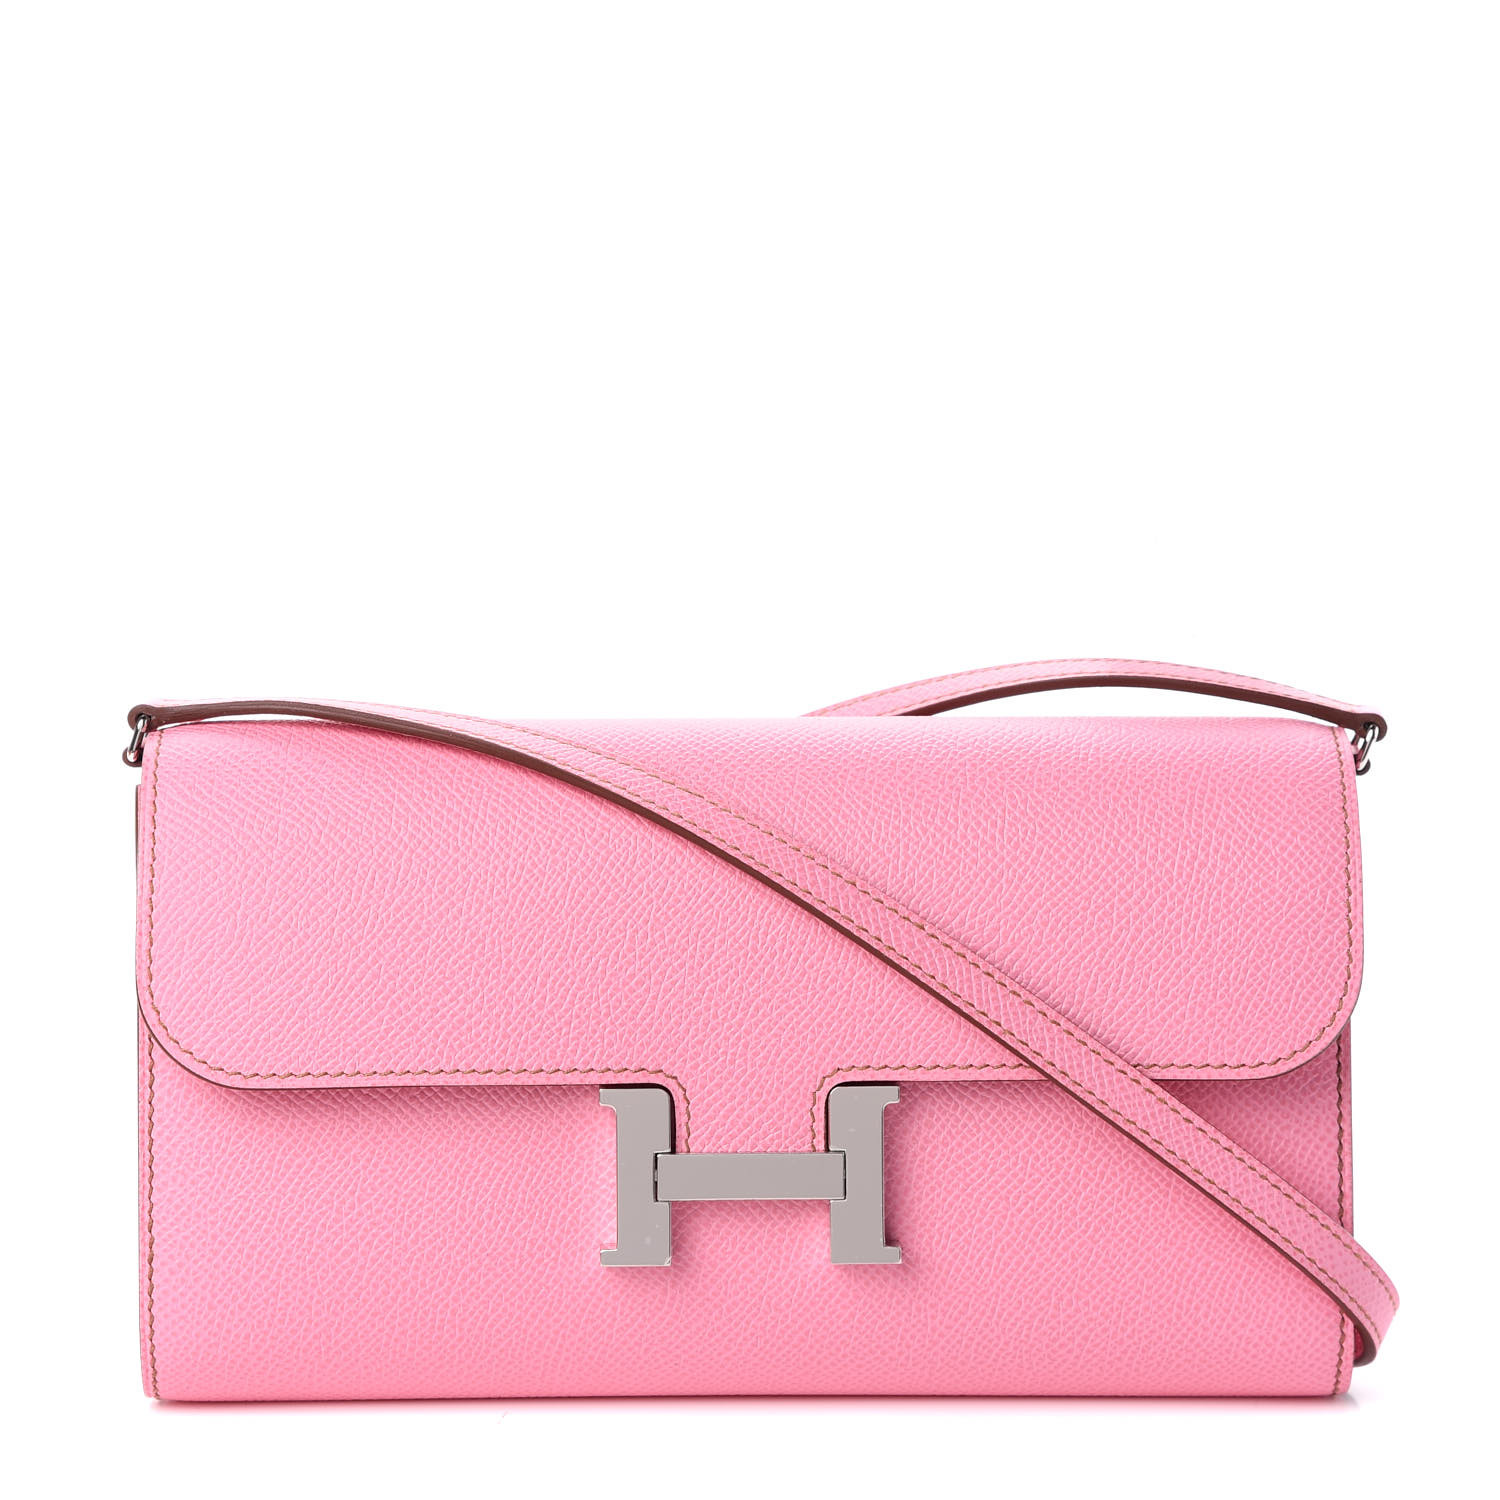 HERMES Epsom Constance Wallet To Go 5P Pink 743035 | FASHIONPHILE